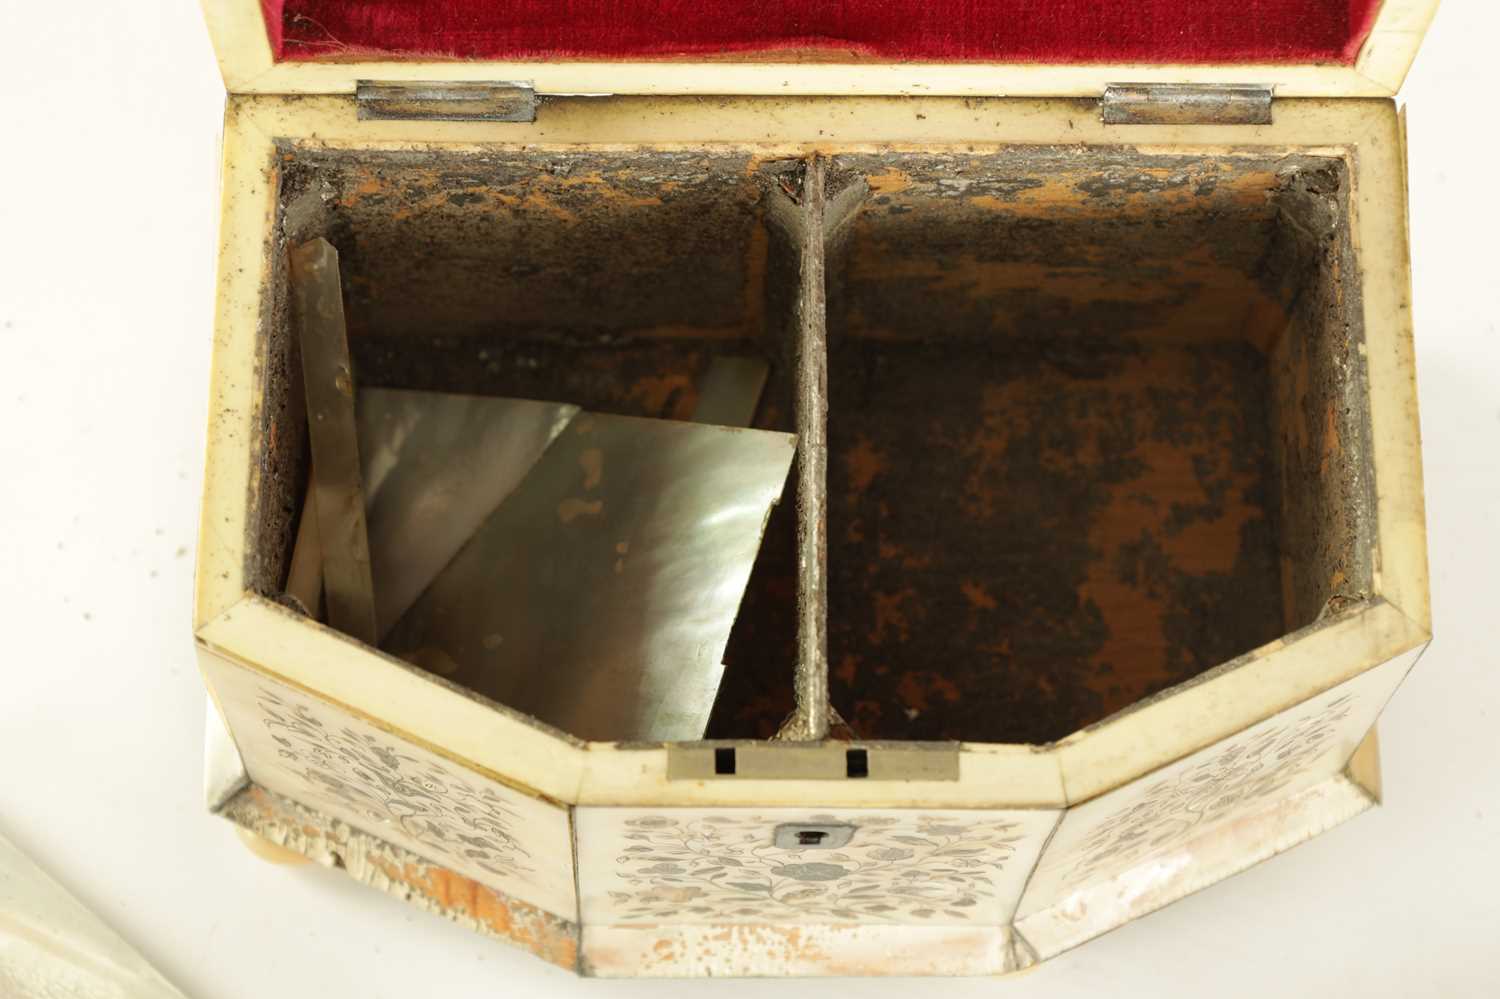 A 19TH CENTURY INLAID MOTHER OF PEARL TEA CADDY WITH CANTED ANGLED FRONT - Image 7 of 10